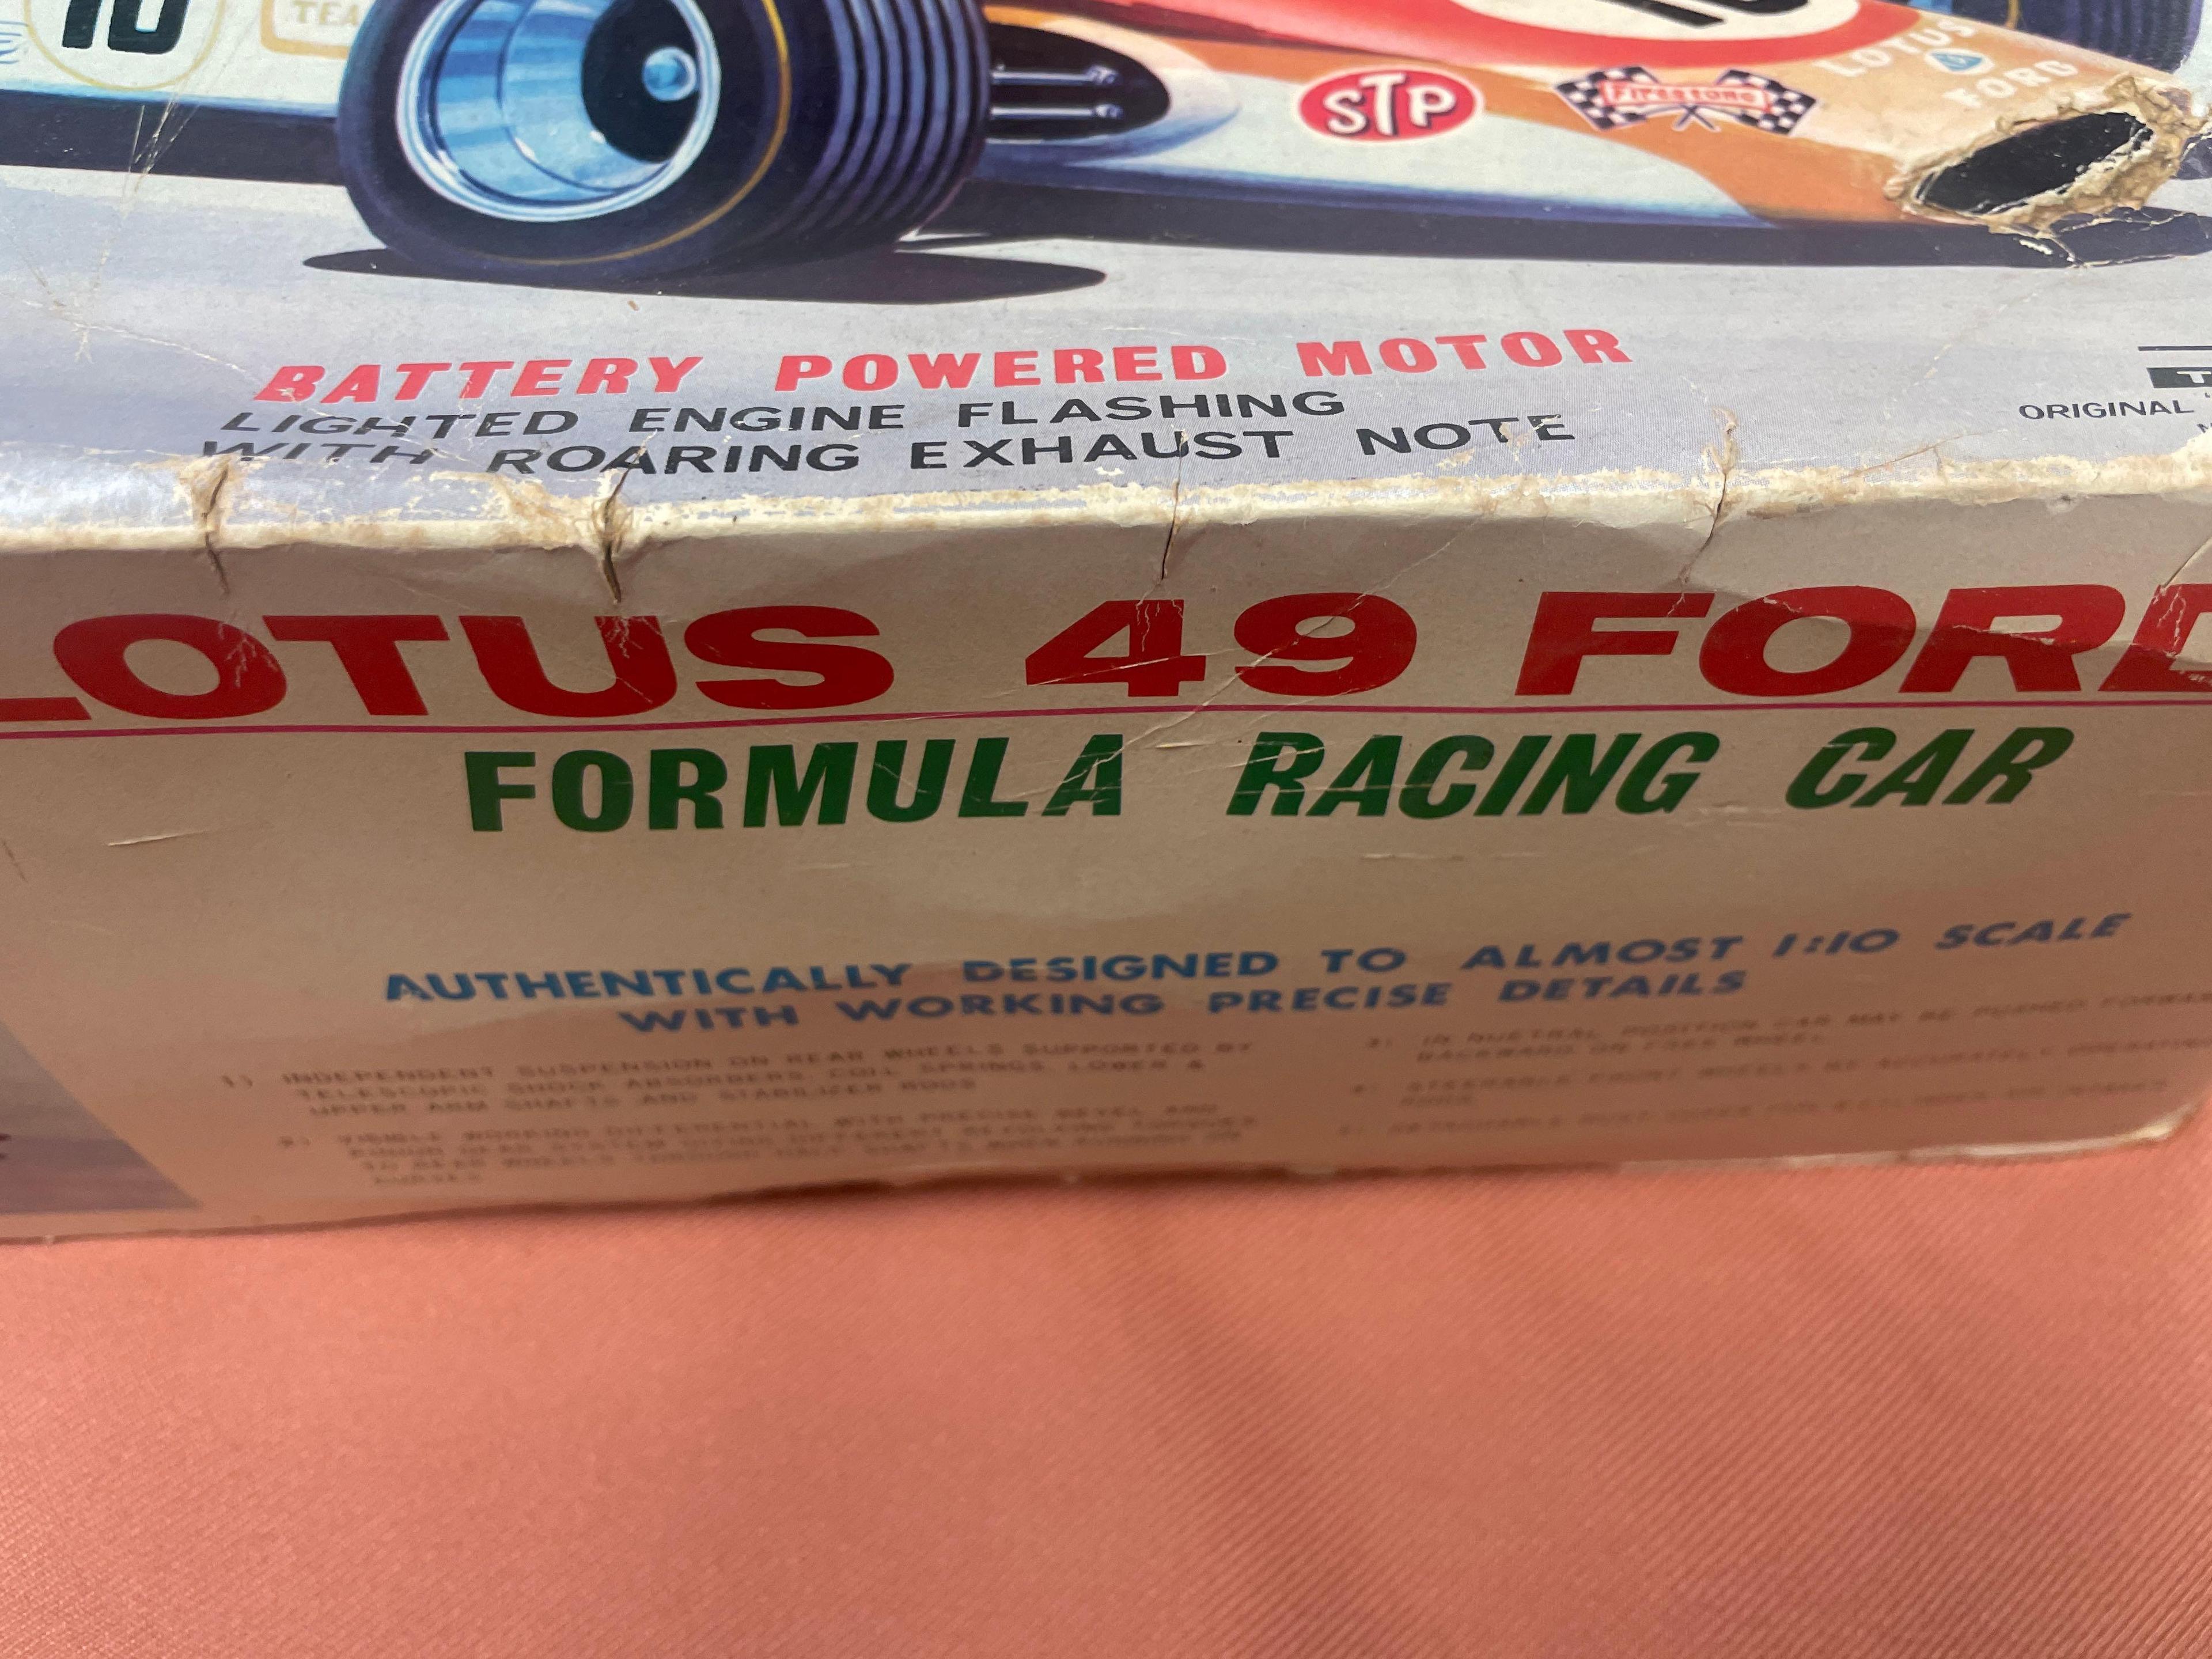 Lotus 49 Ford F-1 Formula Racing Car, battery operated, 1:10 Scale, with original box